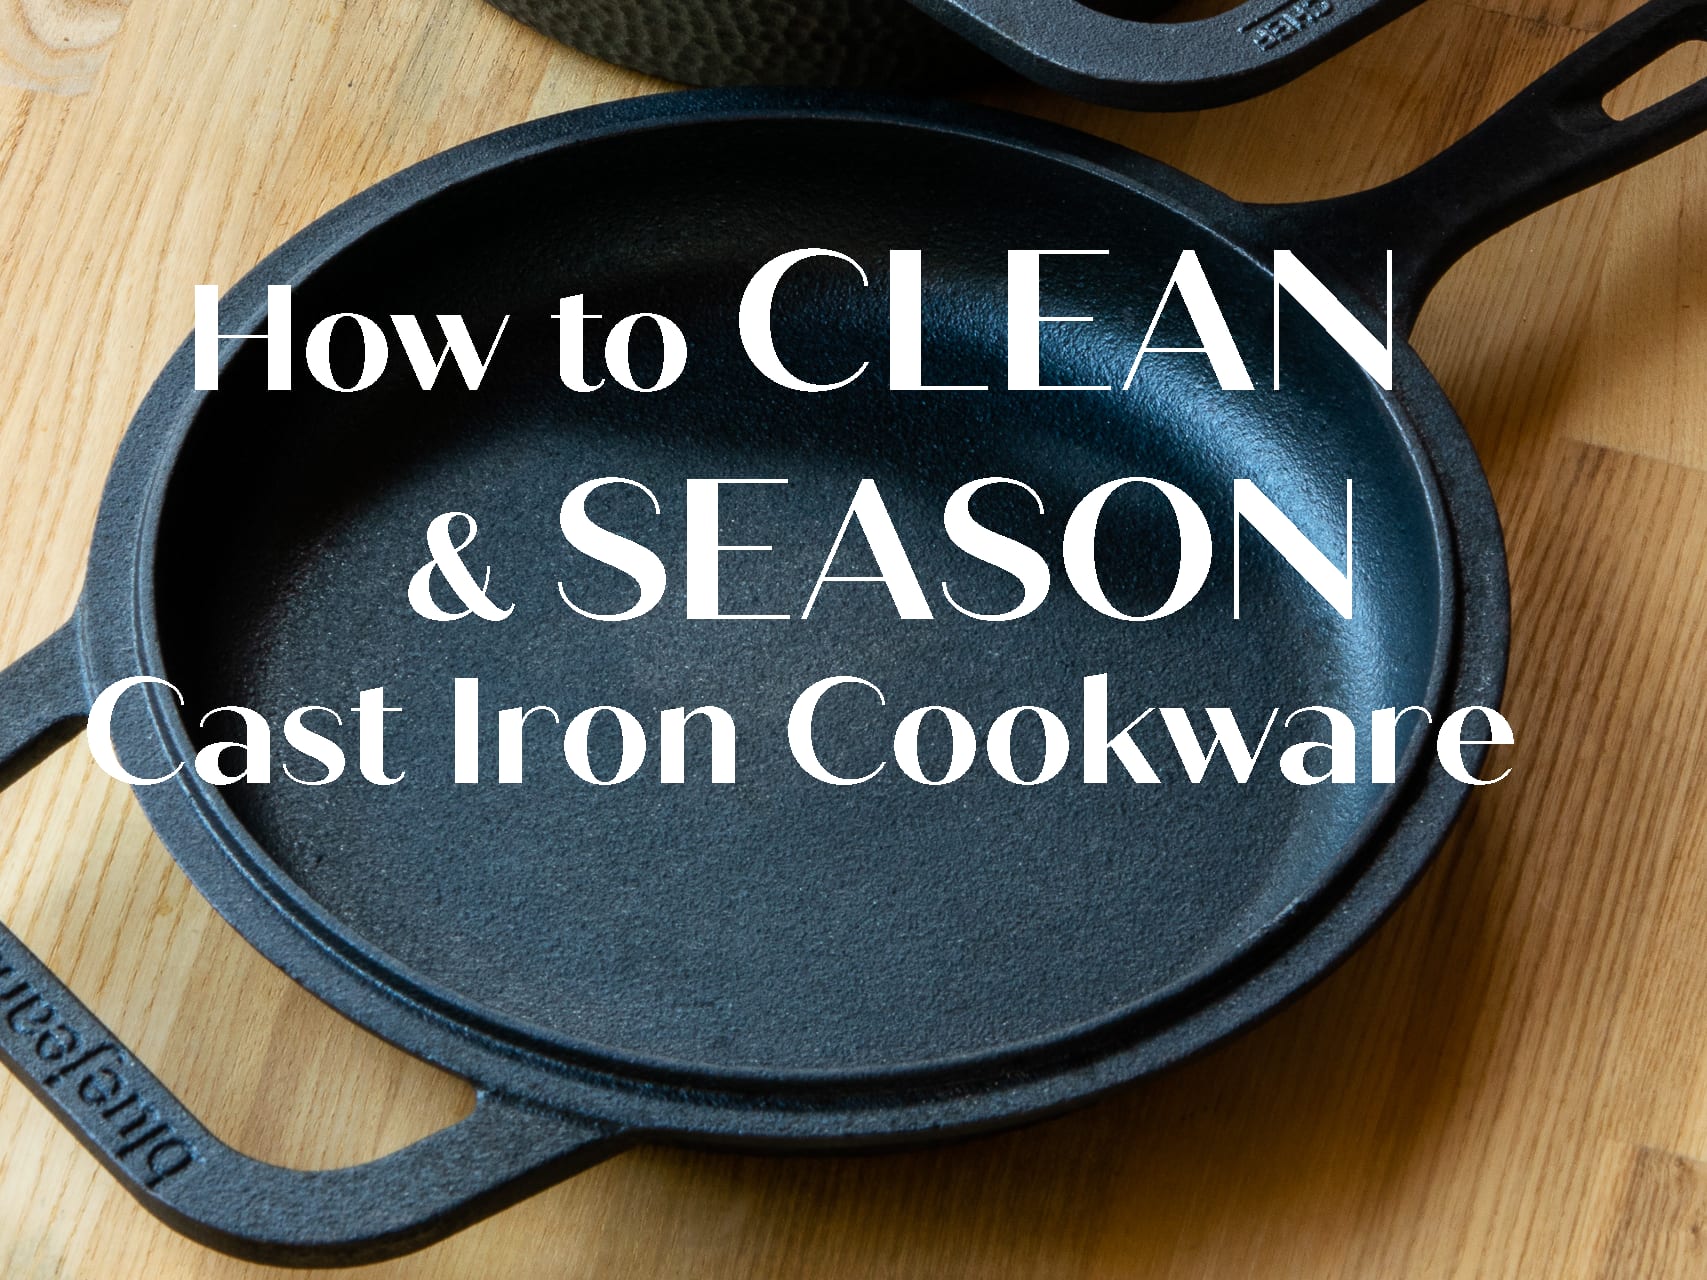 Cast Iron 101 with Chef Jack